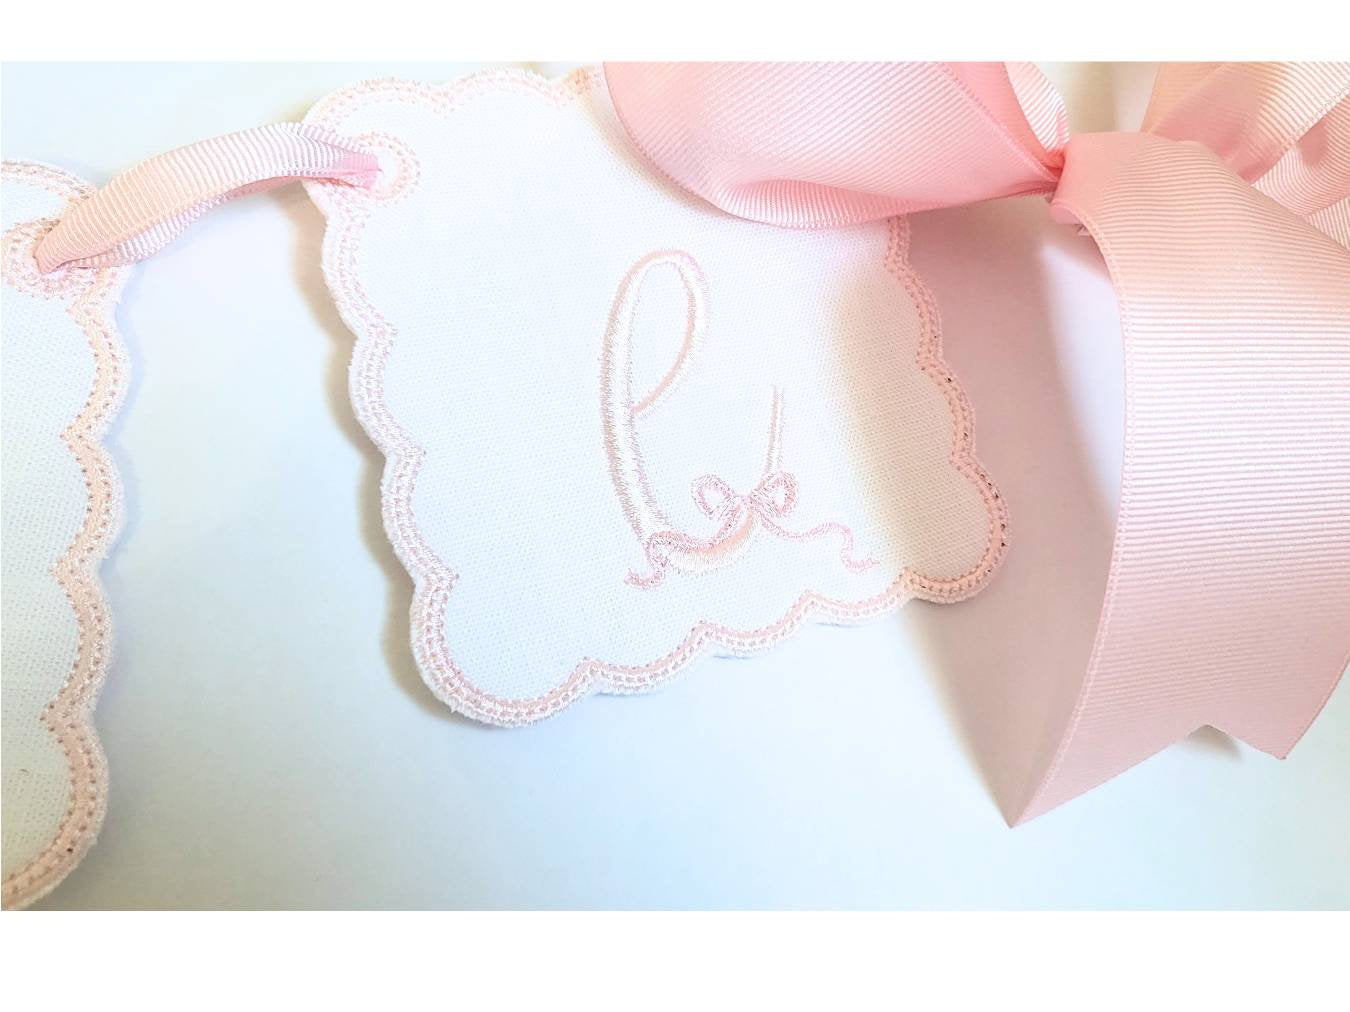 Heirloom Bow Highchair Banner I ONE banner I Blush Pink One Party Banner I Pink White Bow Birthday Banner